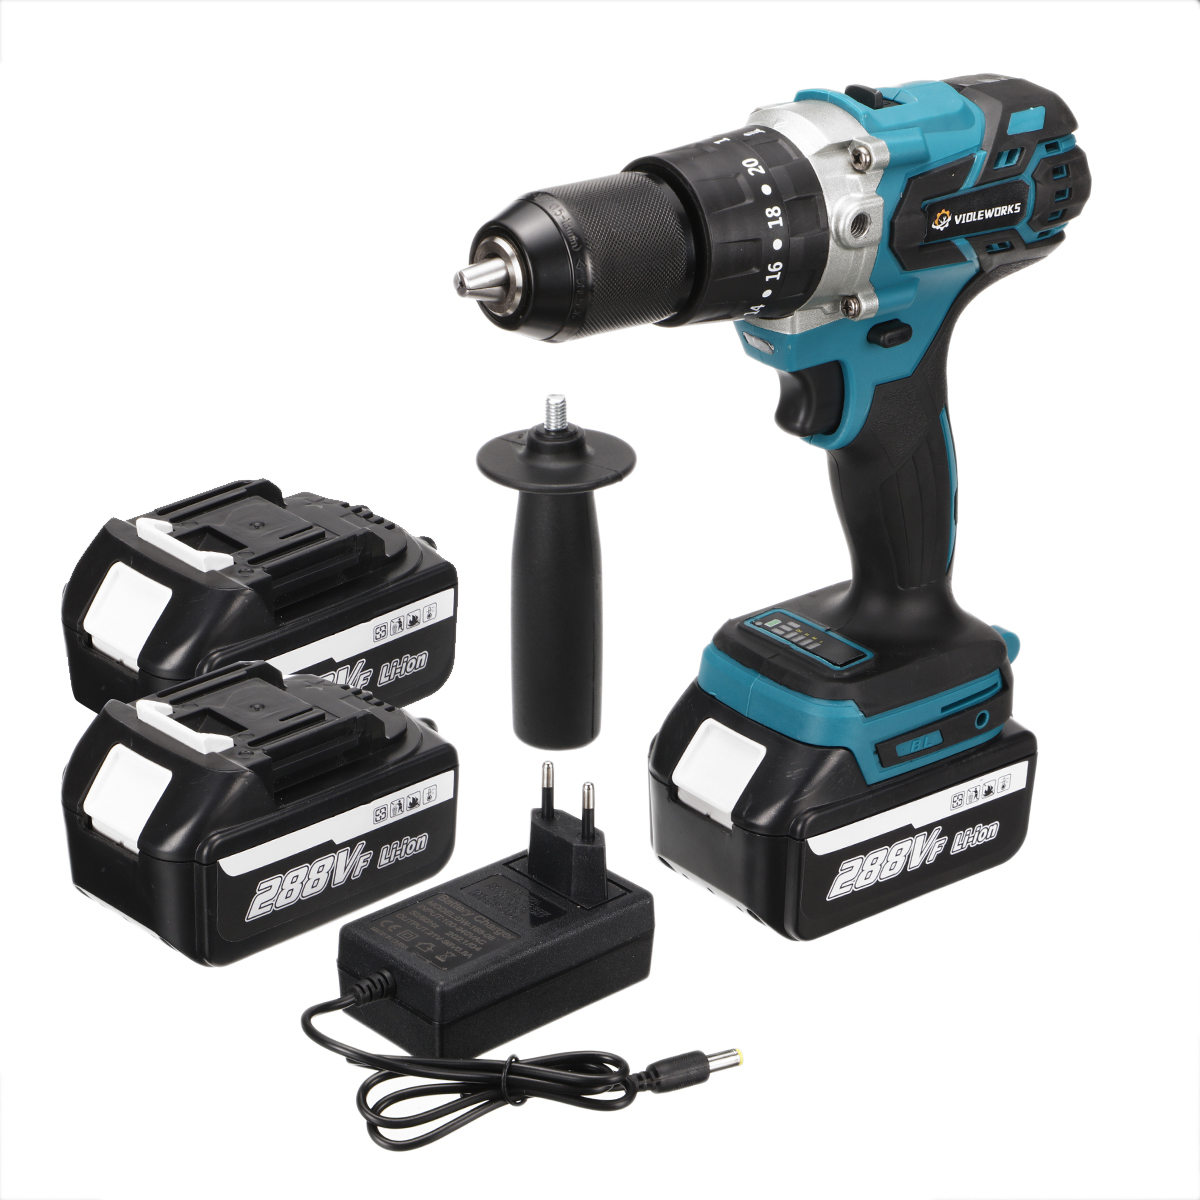 VIOLEWORKS-3-IN-1-288VF-Cordless-Brushless-Hammer-Drill-Speed-Regulated-Electric-Screwdriver-Impact--1852902-7